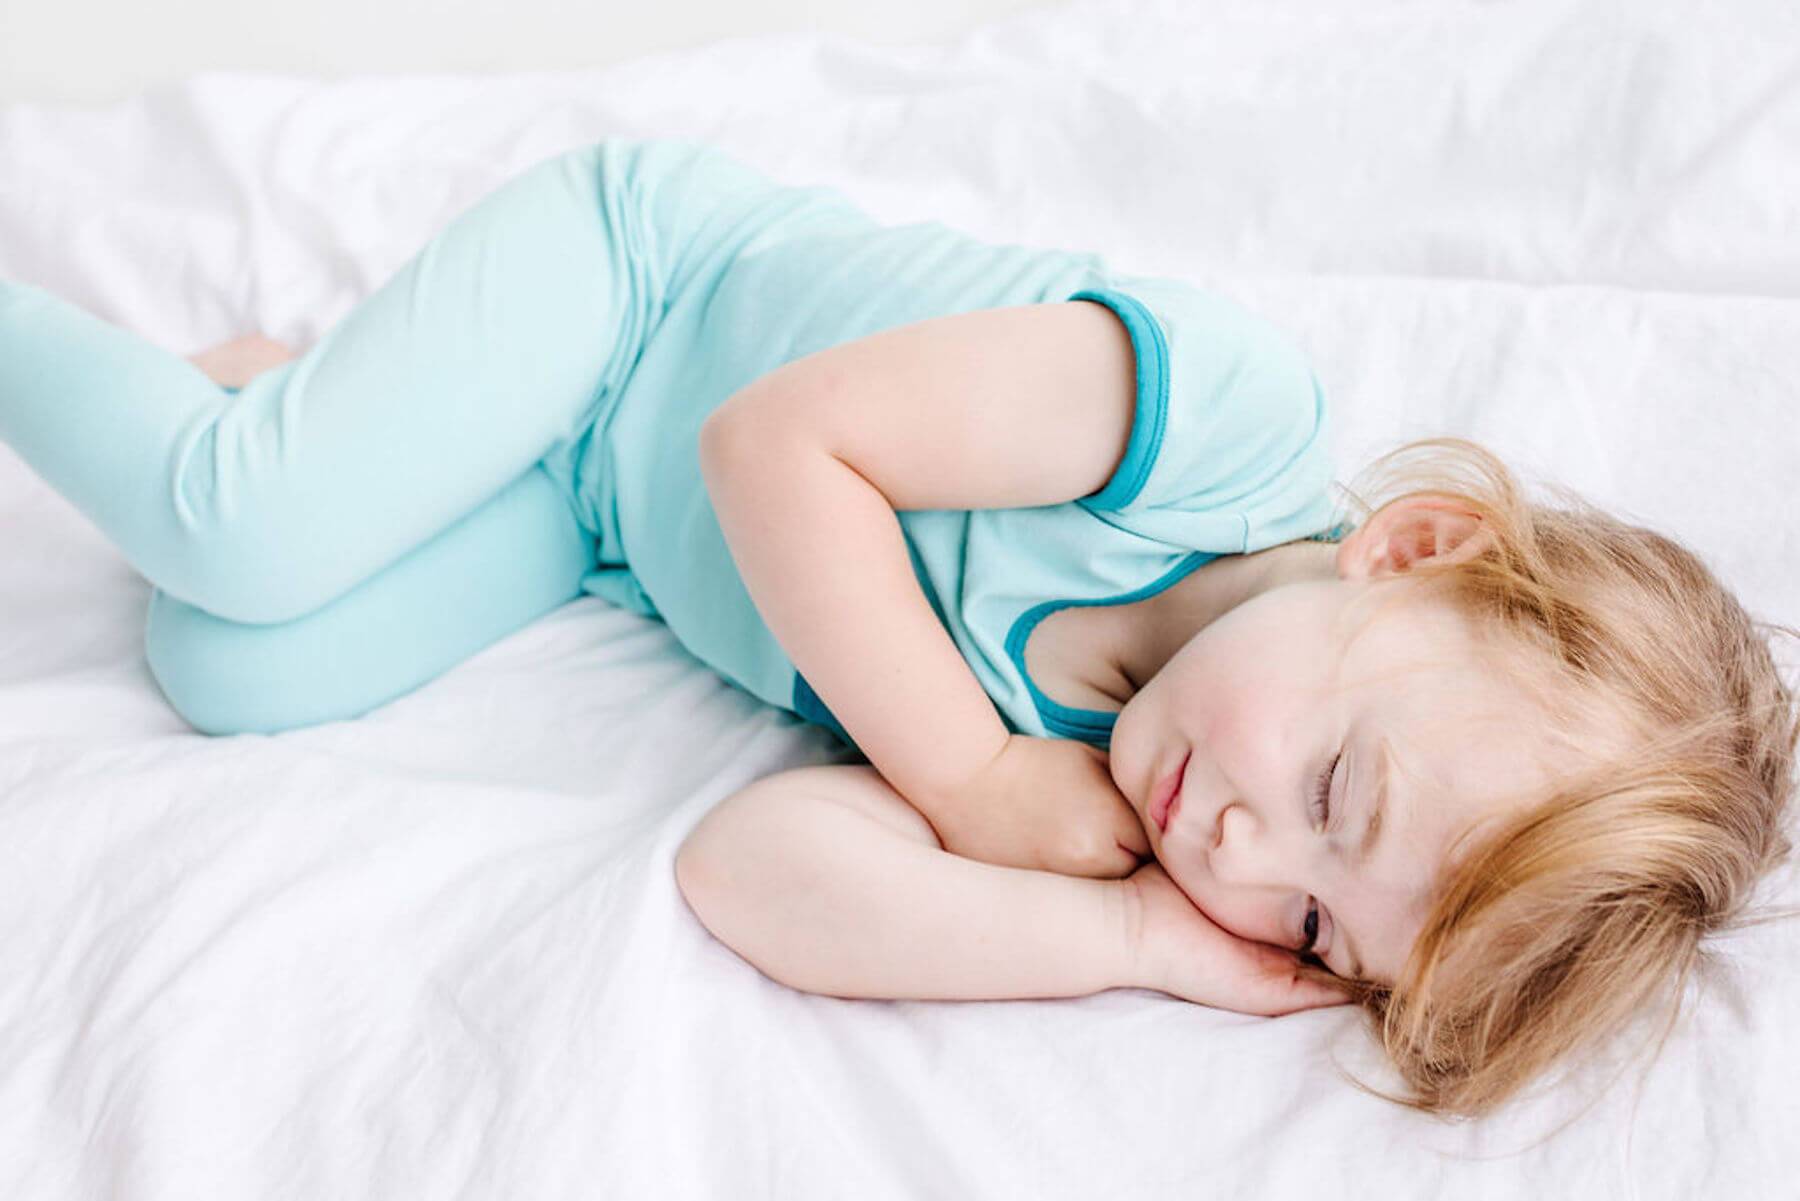 Can my Infant Sleep with a Blanket? Answers to Your 4 Biggest Sleep Safety Questions - Wear Lark